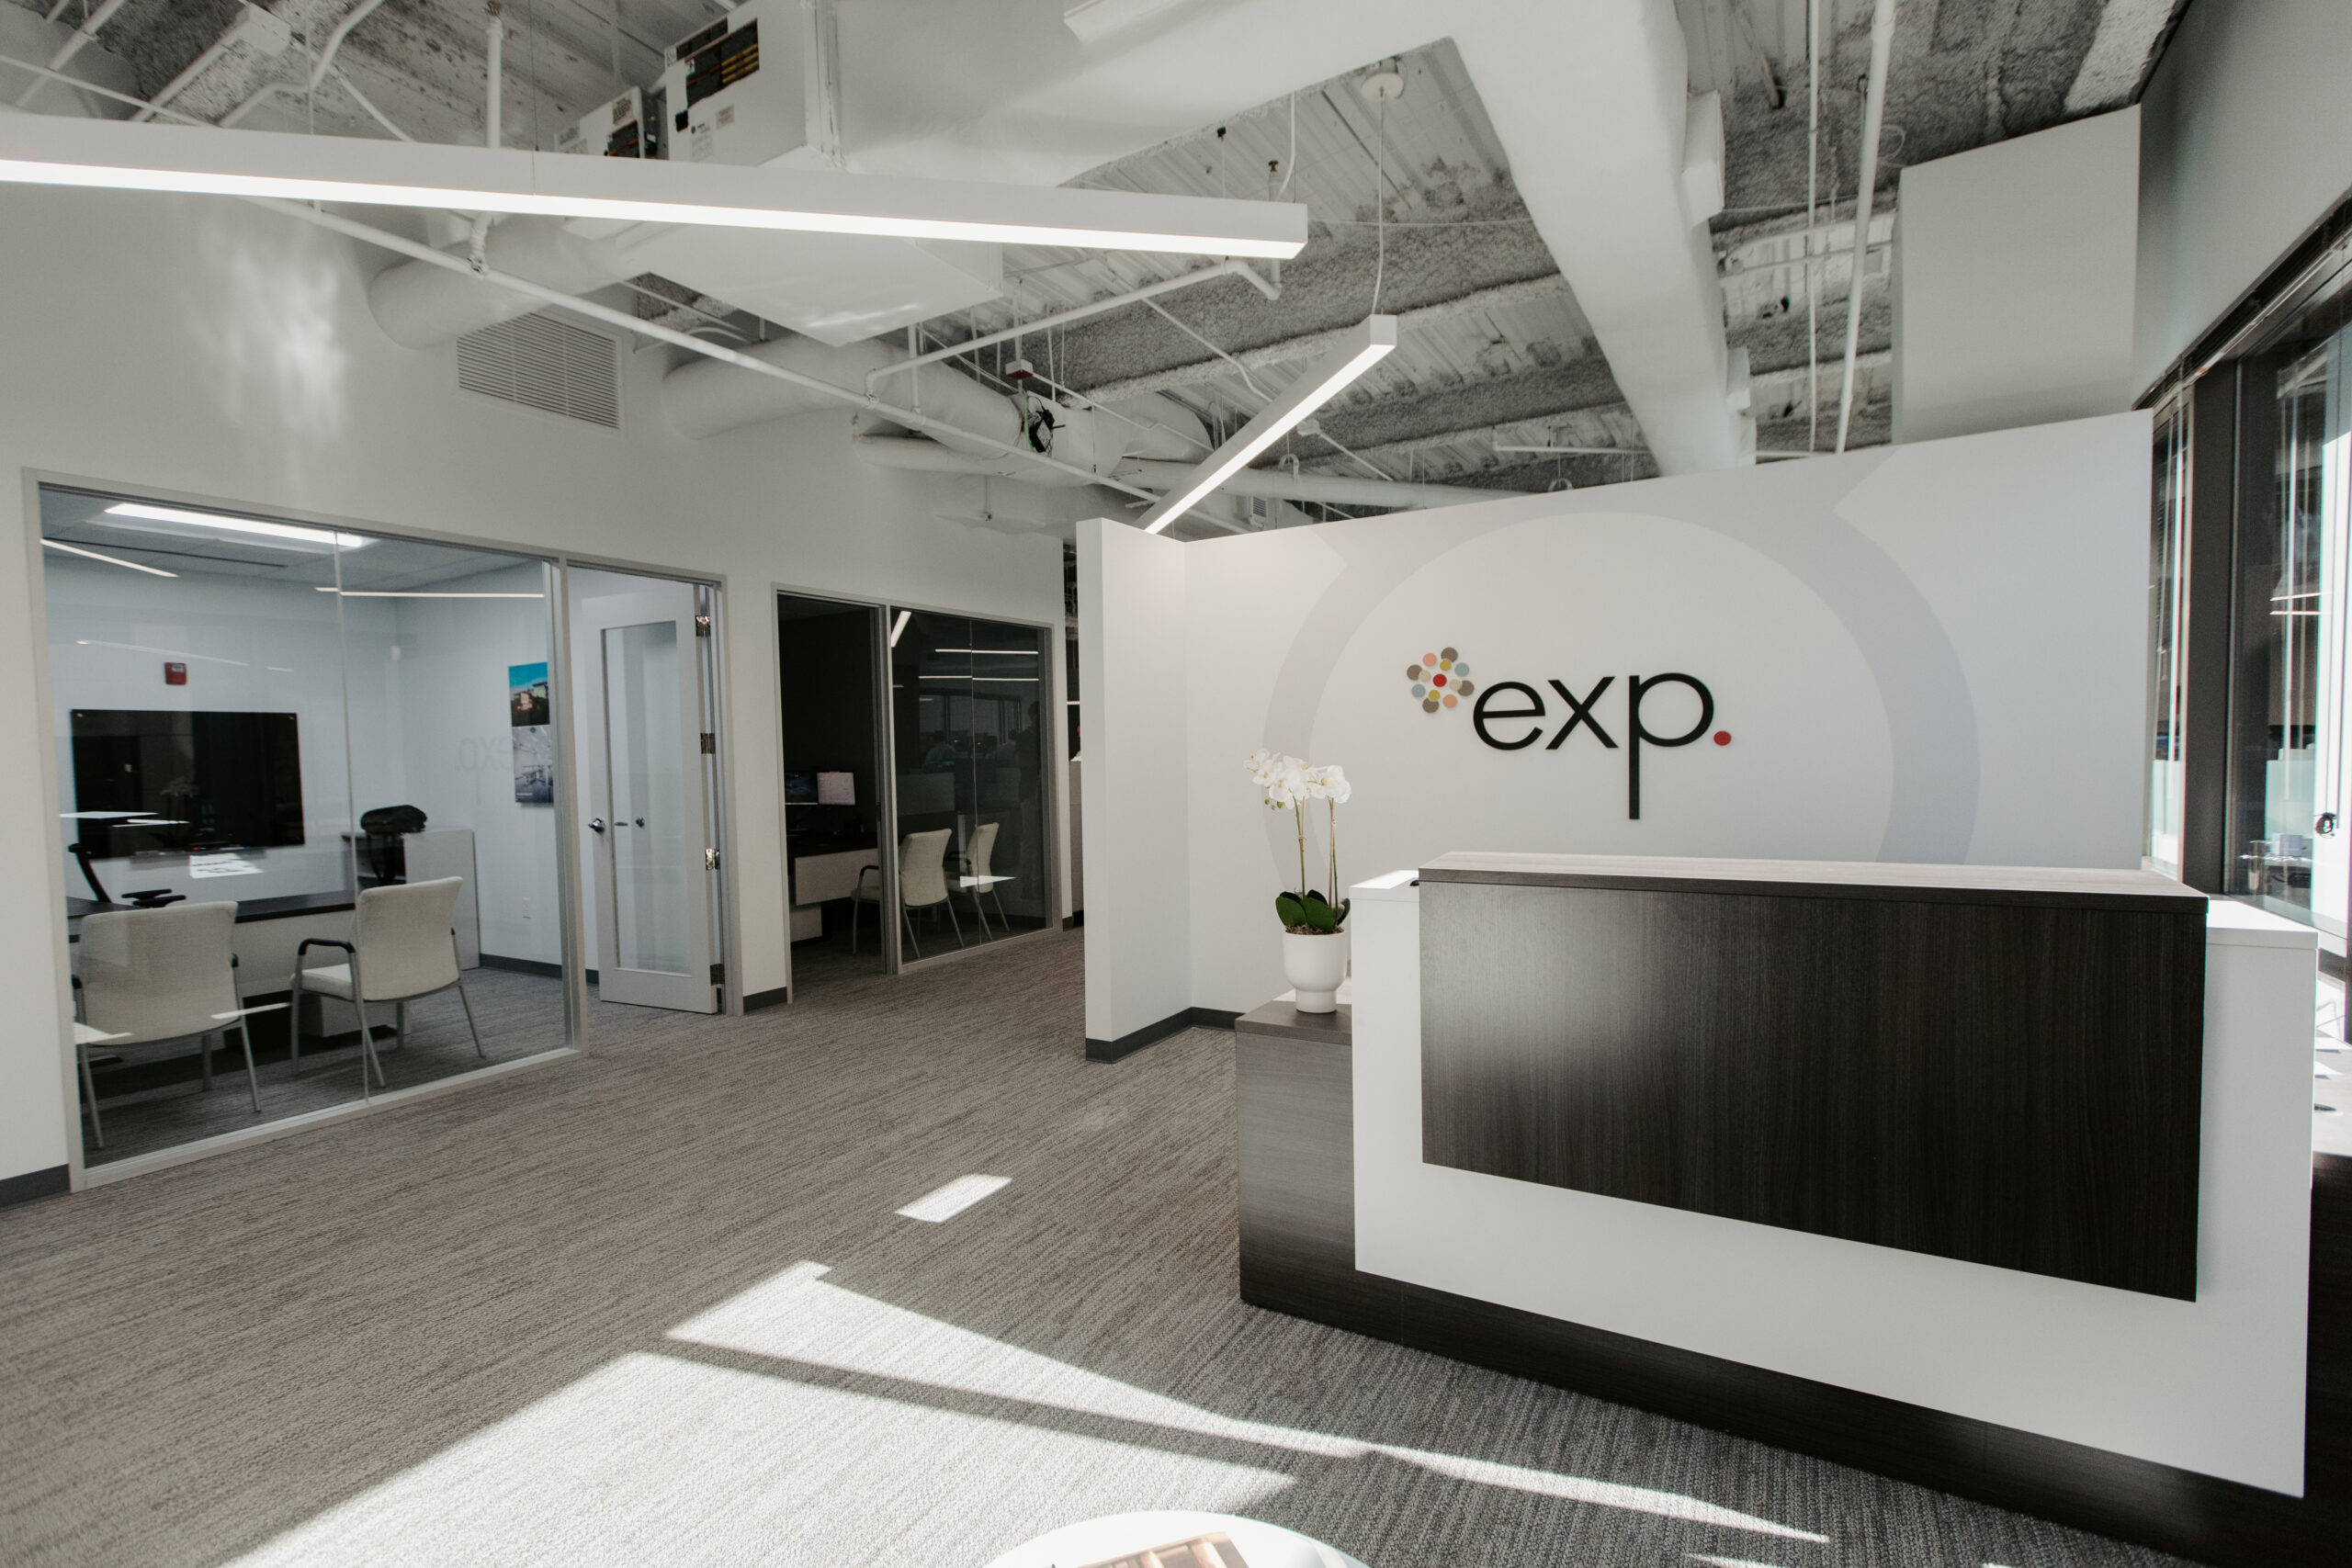 Modern office lobby with a reception desk featuring the company logo 'exp' and a clean, minimalist design.